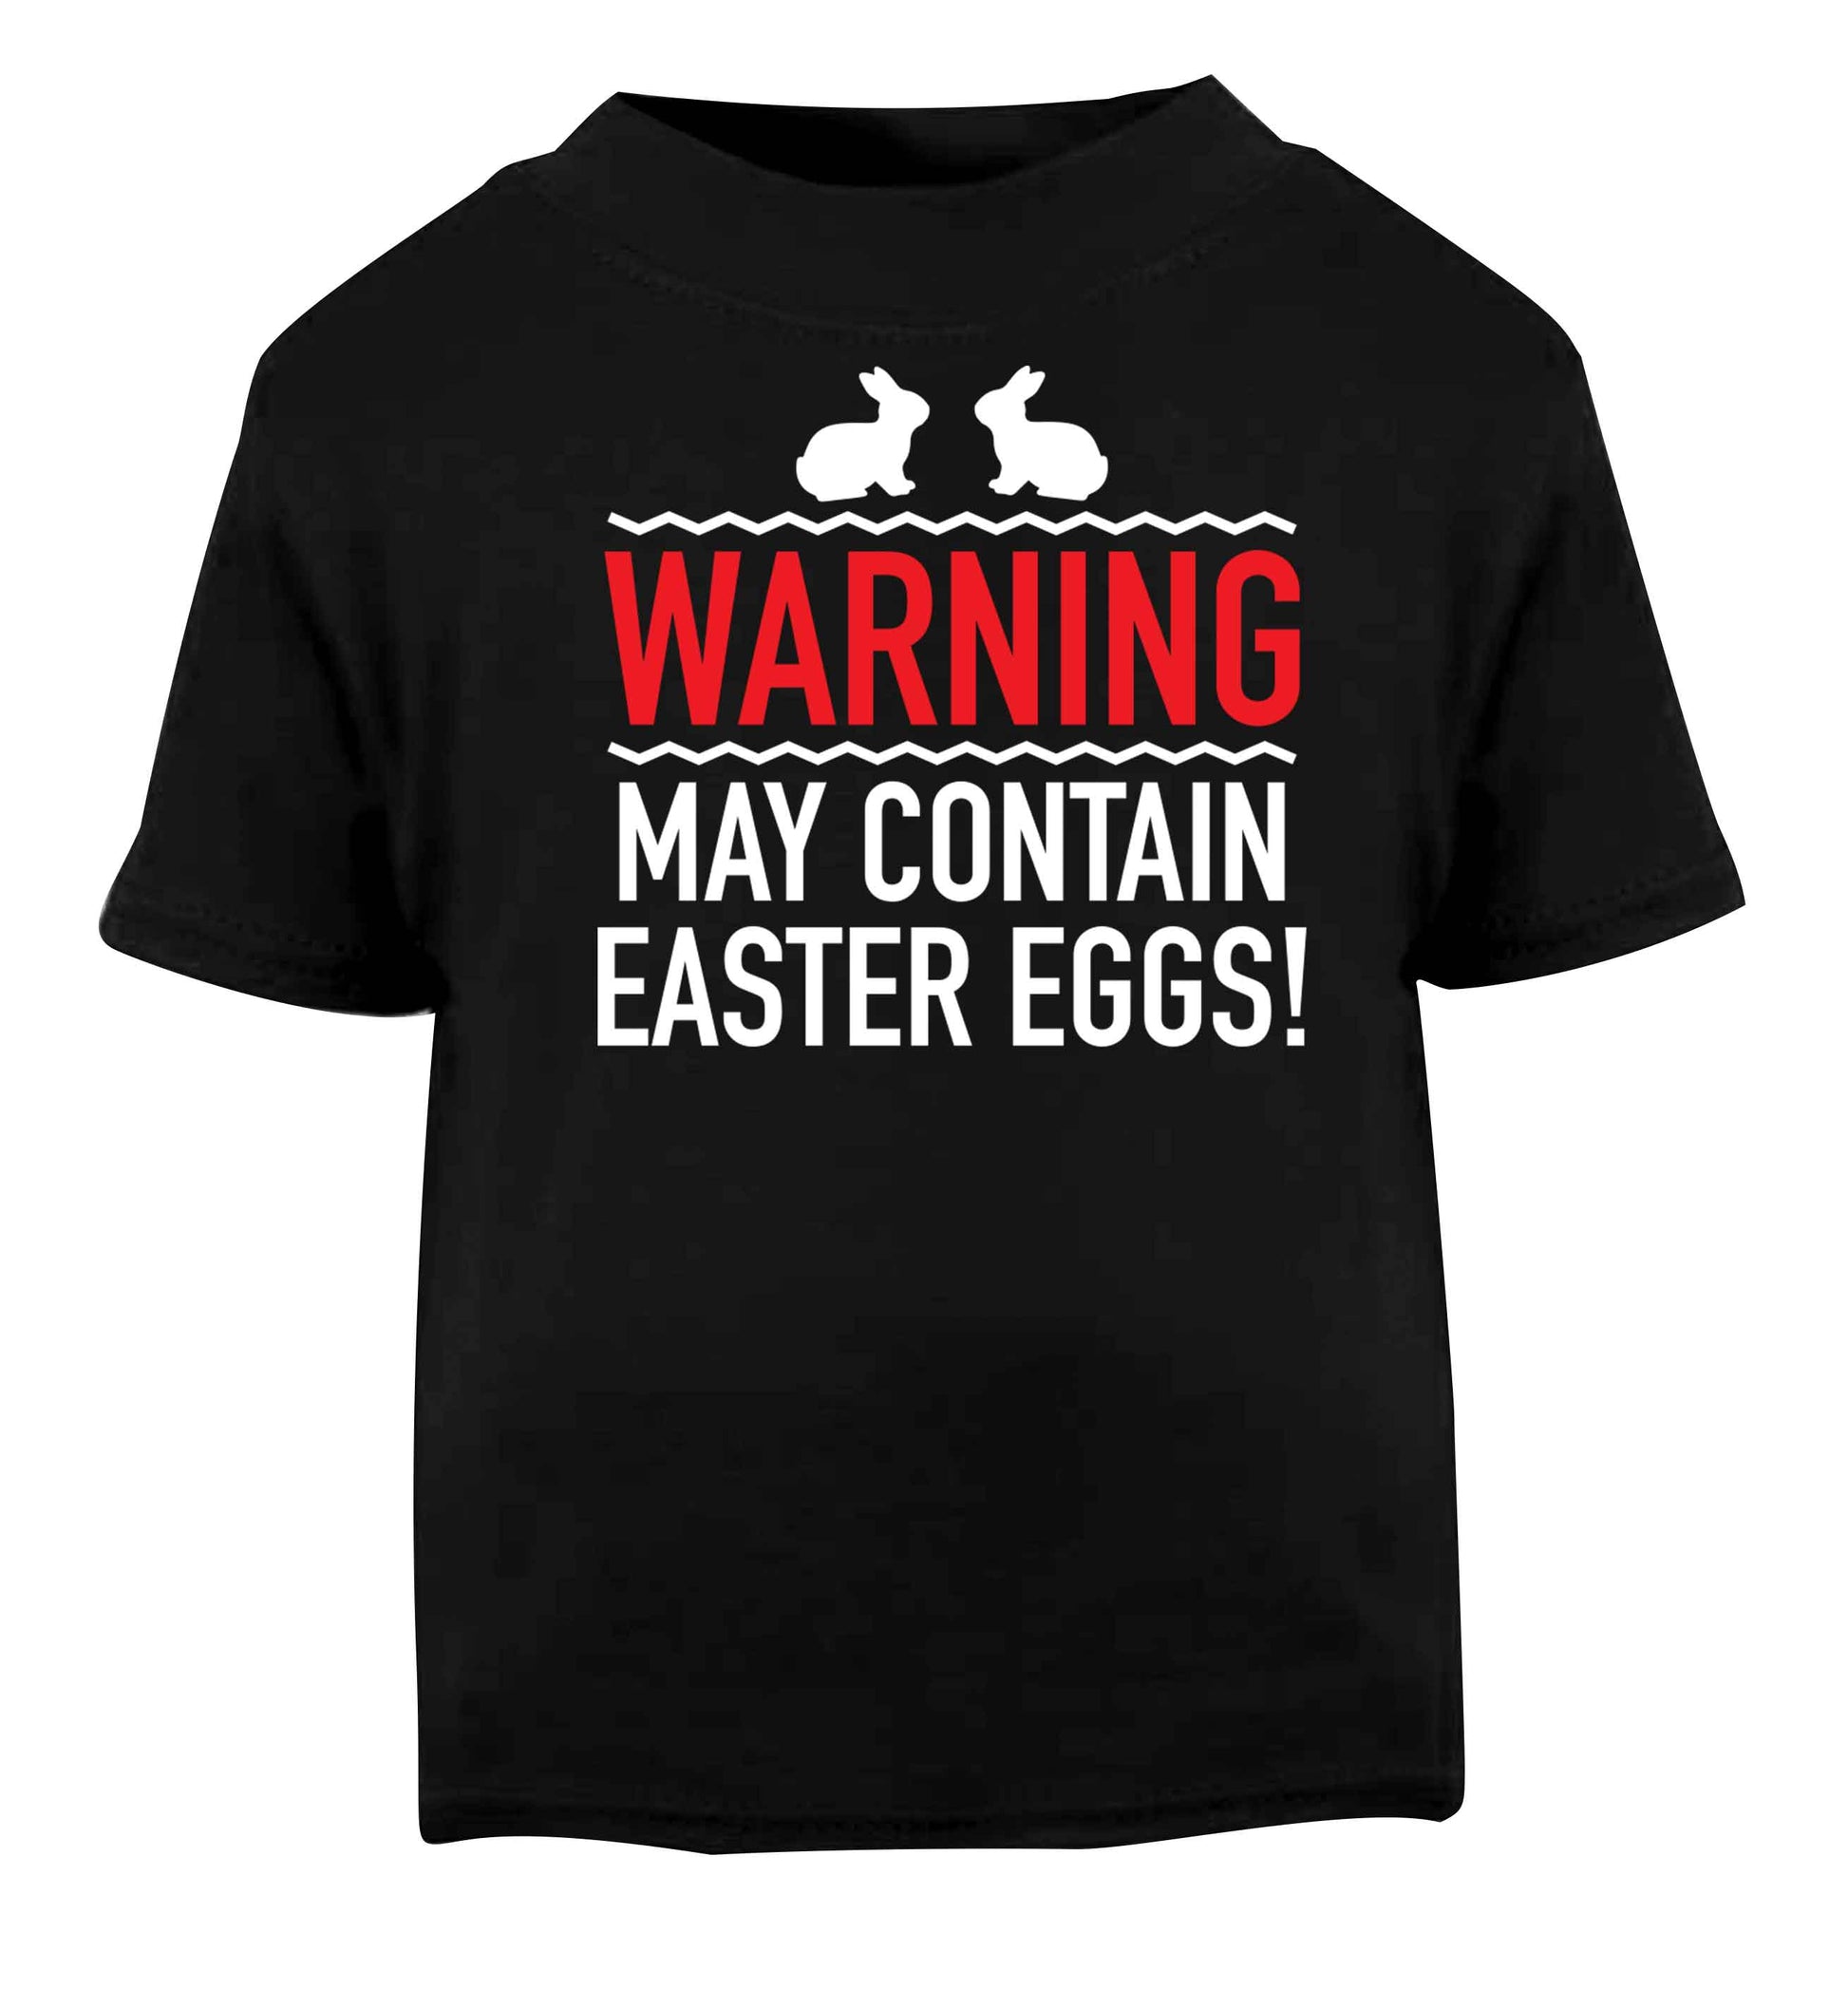 Warning may contain Easter eggs Black baby toddler Tshirt 2 years